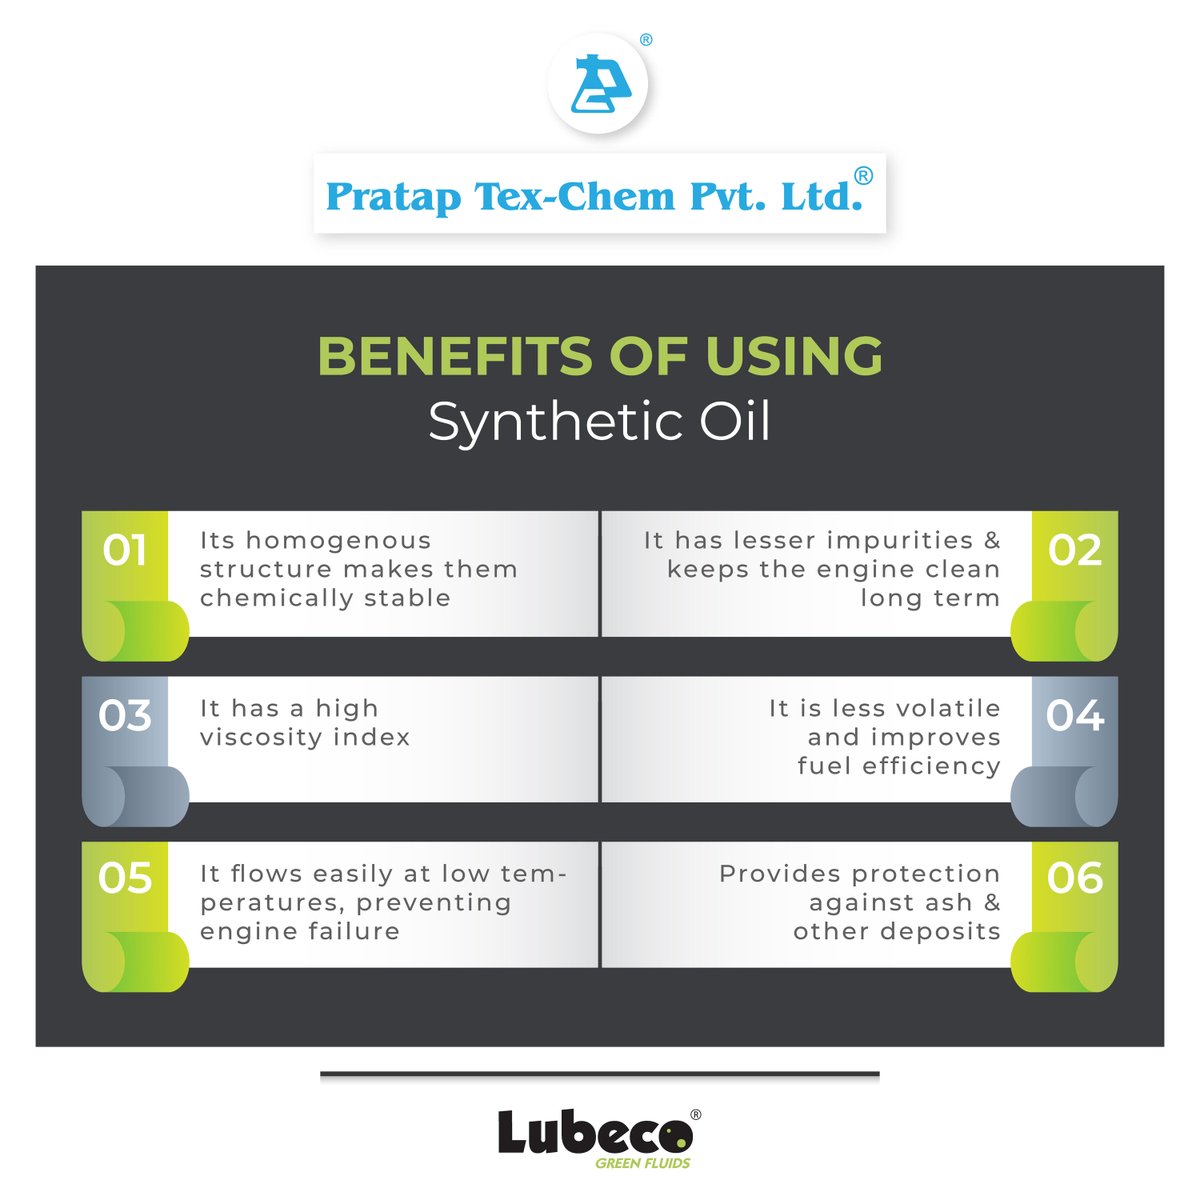 Synthetic lubricants are an artificial composition of chemically amended compounds like petroleum components with distilled crude oil being the base material.

#PTCPL #Lubeco #greenfluids #Syntheticlubricants #Syntheticoil